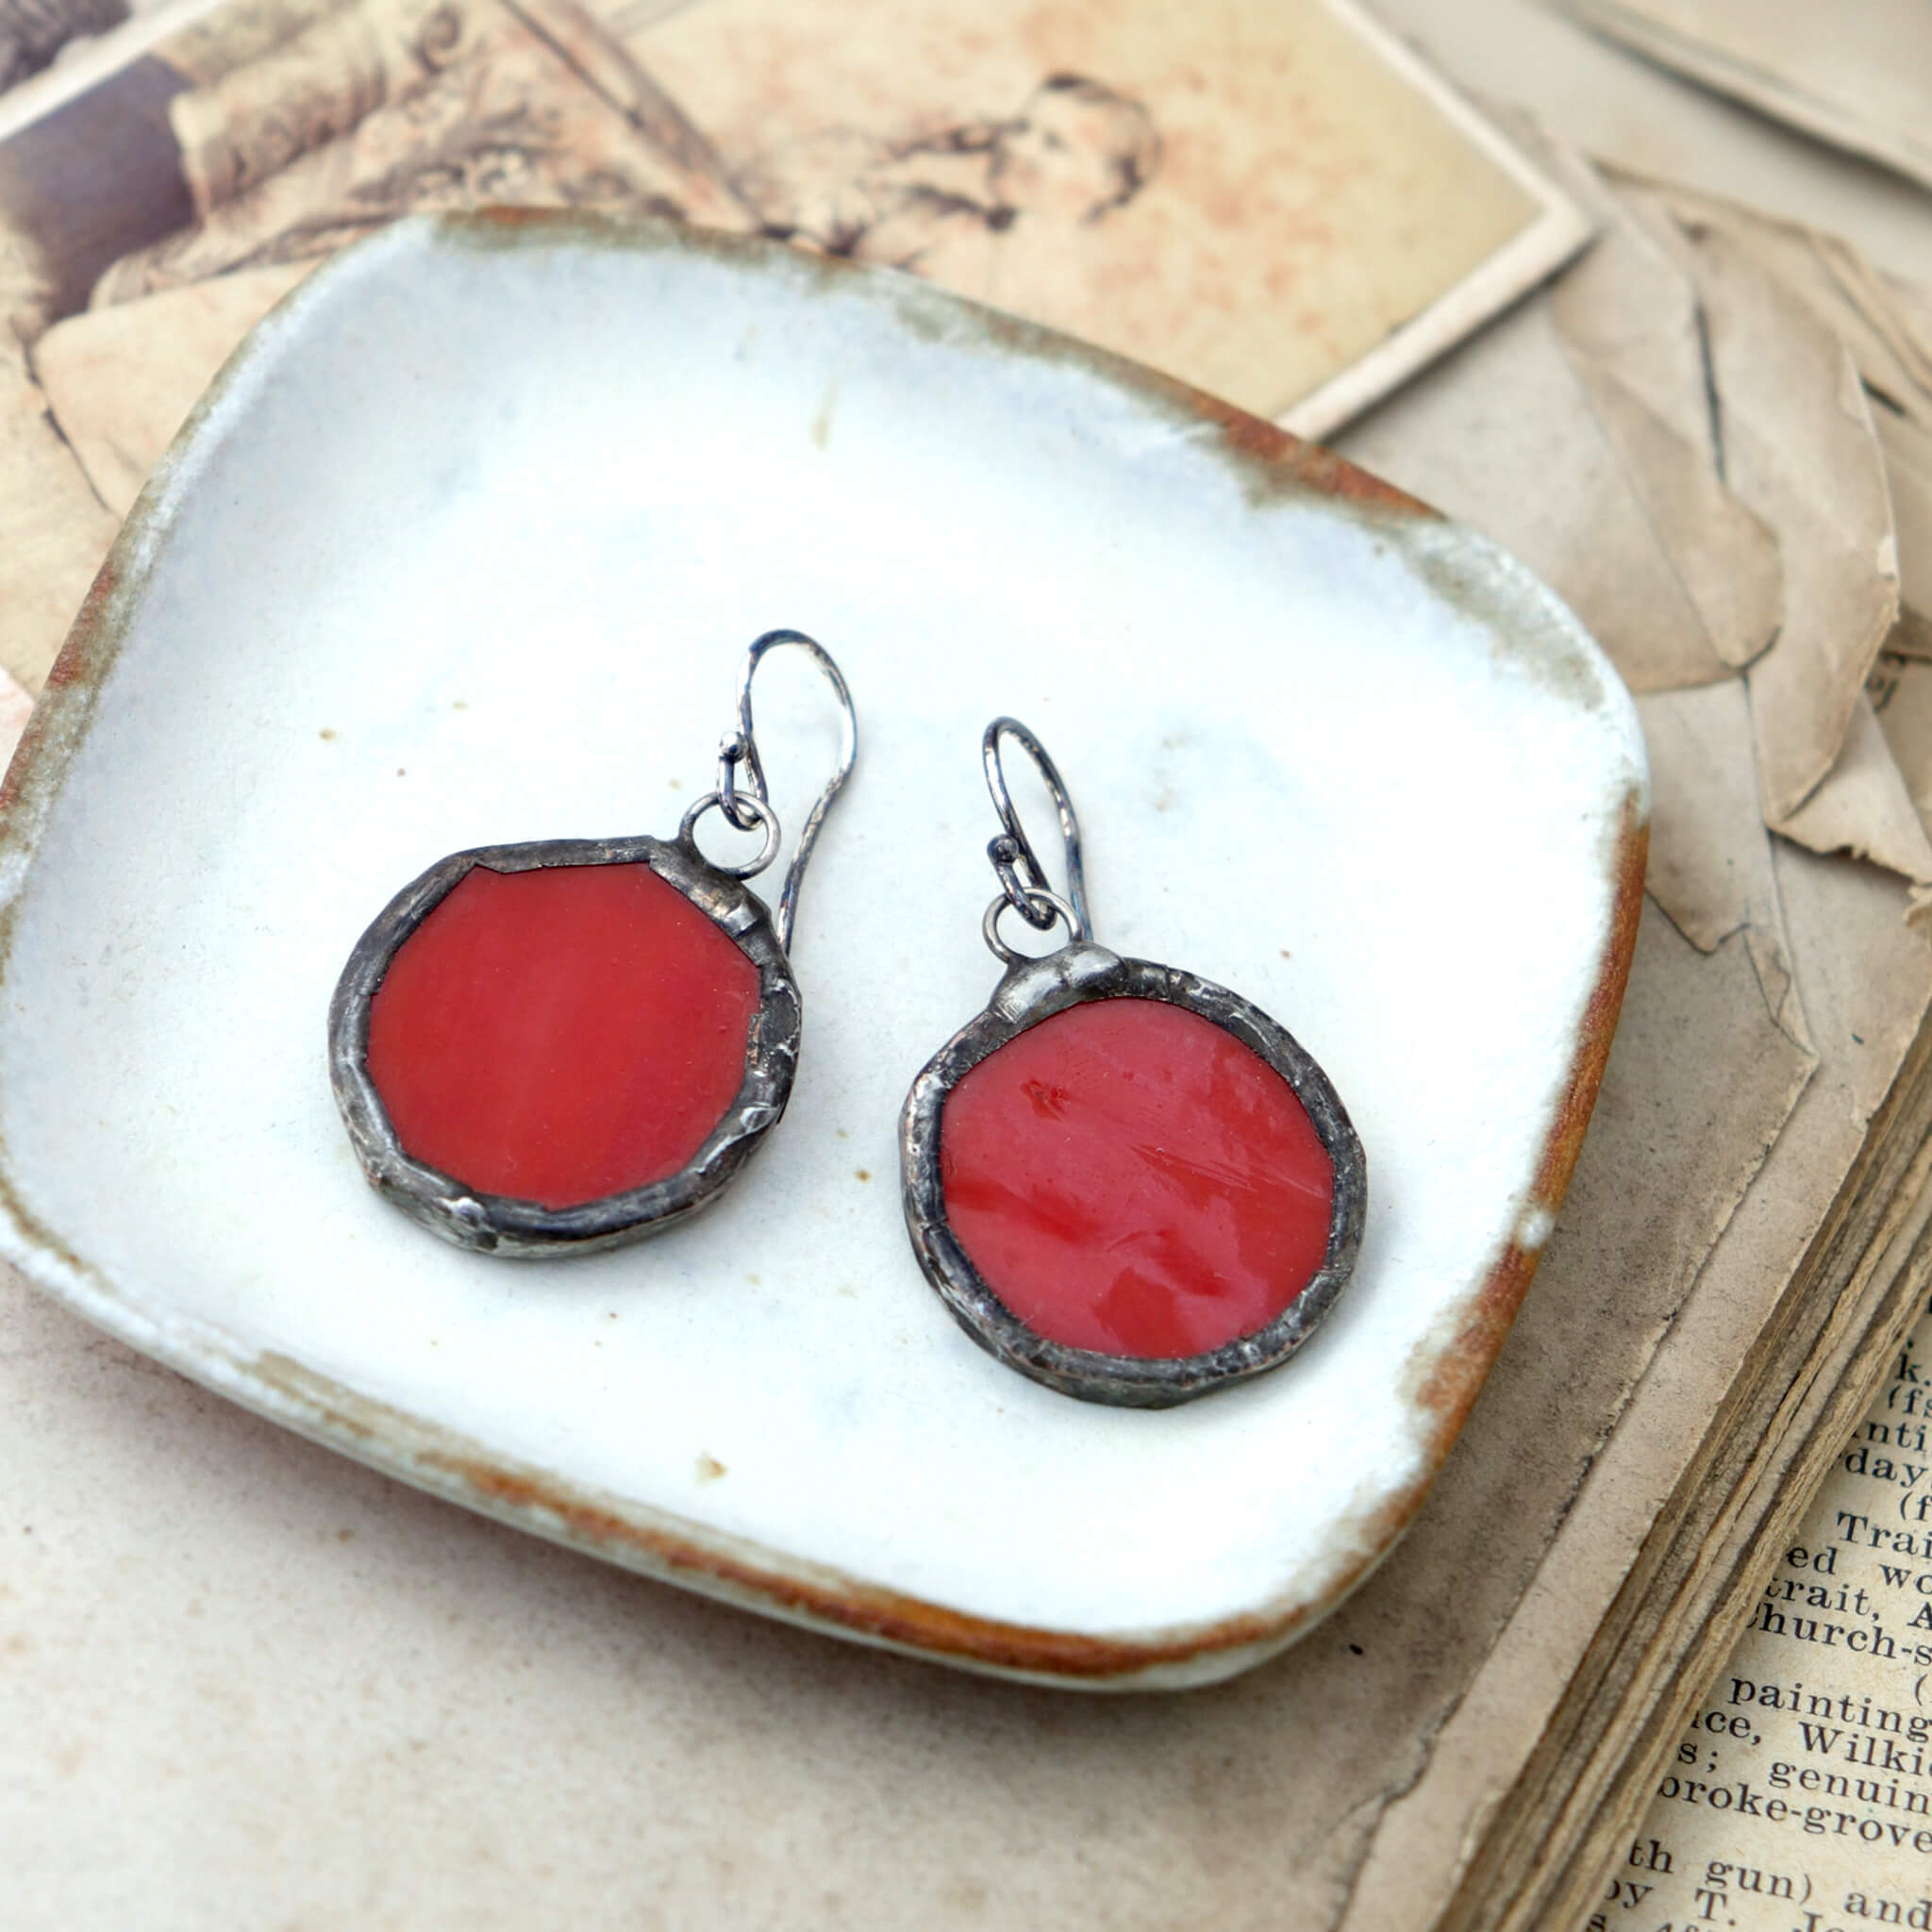 circles of glass in red colour turned into stained glass earrings lying on a white dish